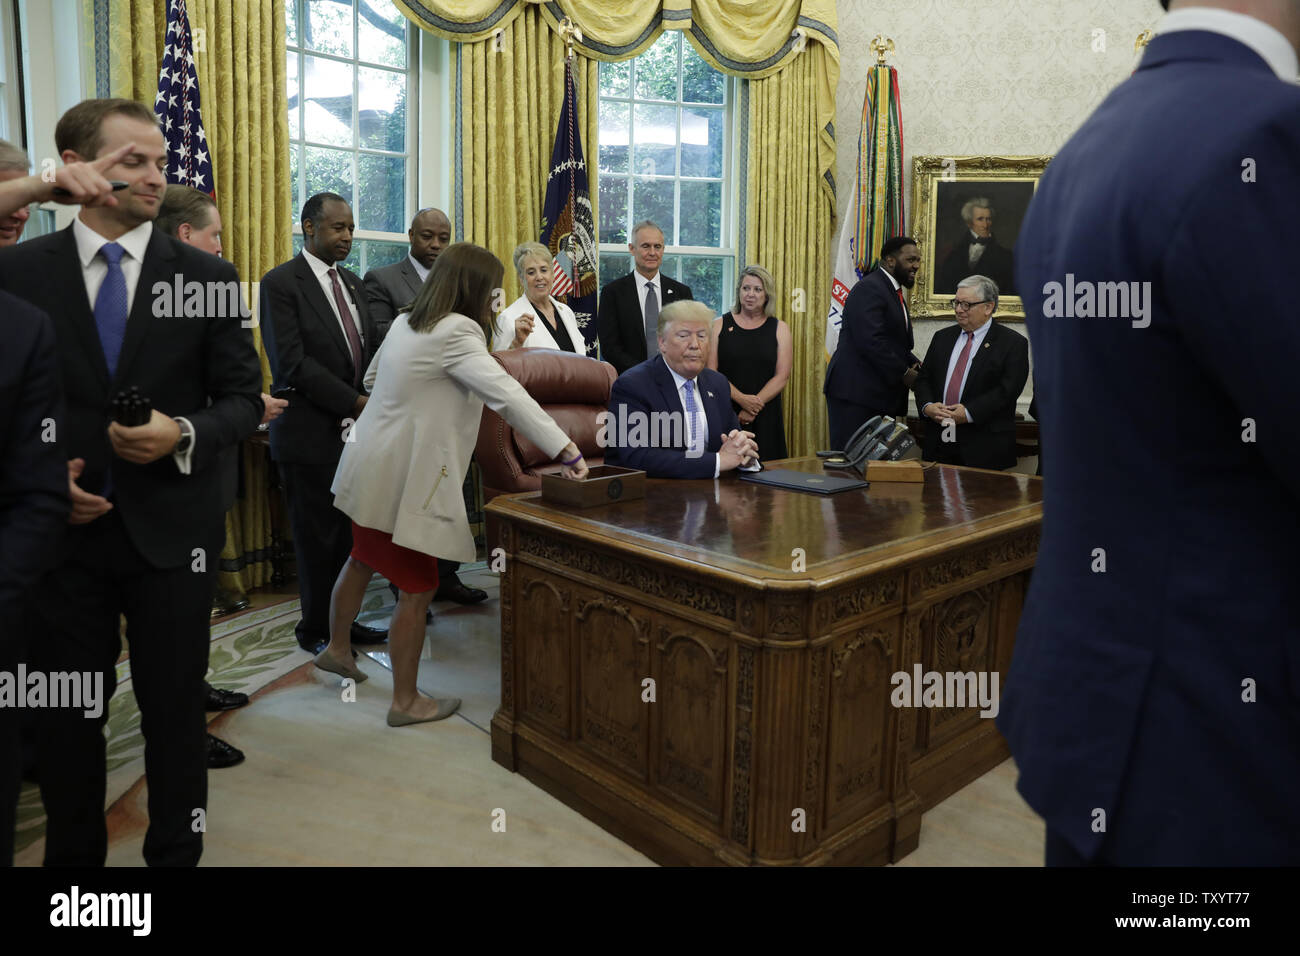 Washington, District of Columbia, USA. 25th June, 2019. US President Donald Trump talk to the media after signing an Executive Order Establishing a White House Council on Eliminating Regulatory Barriers to Affordable Housing in the Oval Office at the White House in Washington, DC, on June 25, 2019 Credit: Yuri Gripas/CNP/ZUMA Wire/Alamy Live News Stock Photo